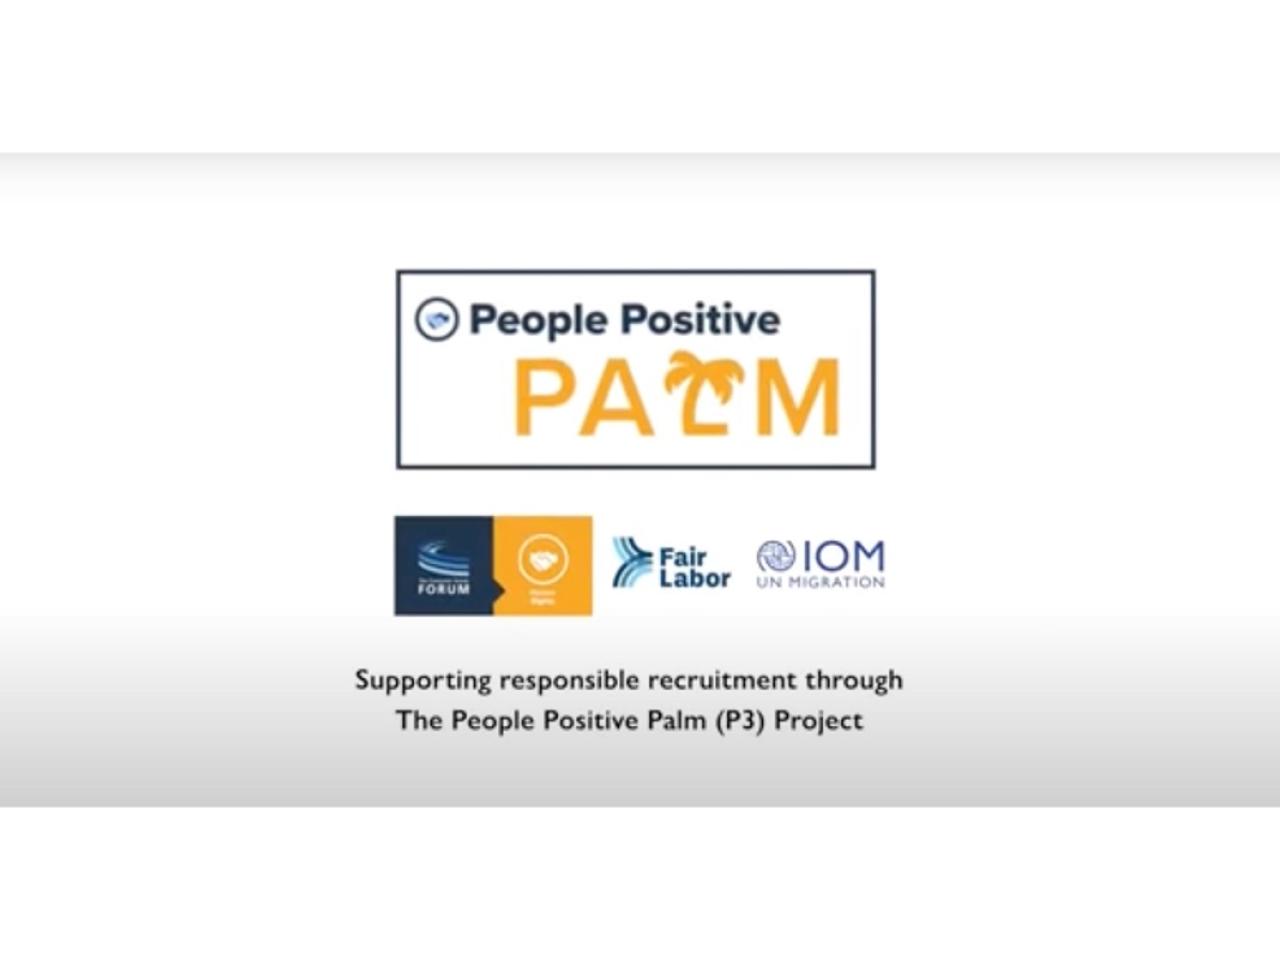 People Positive PALM, The Consumer Goods Forum, Fair Labor, and IOM logos